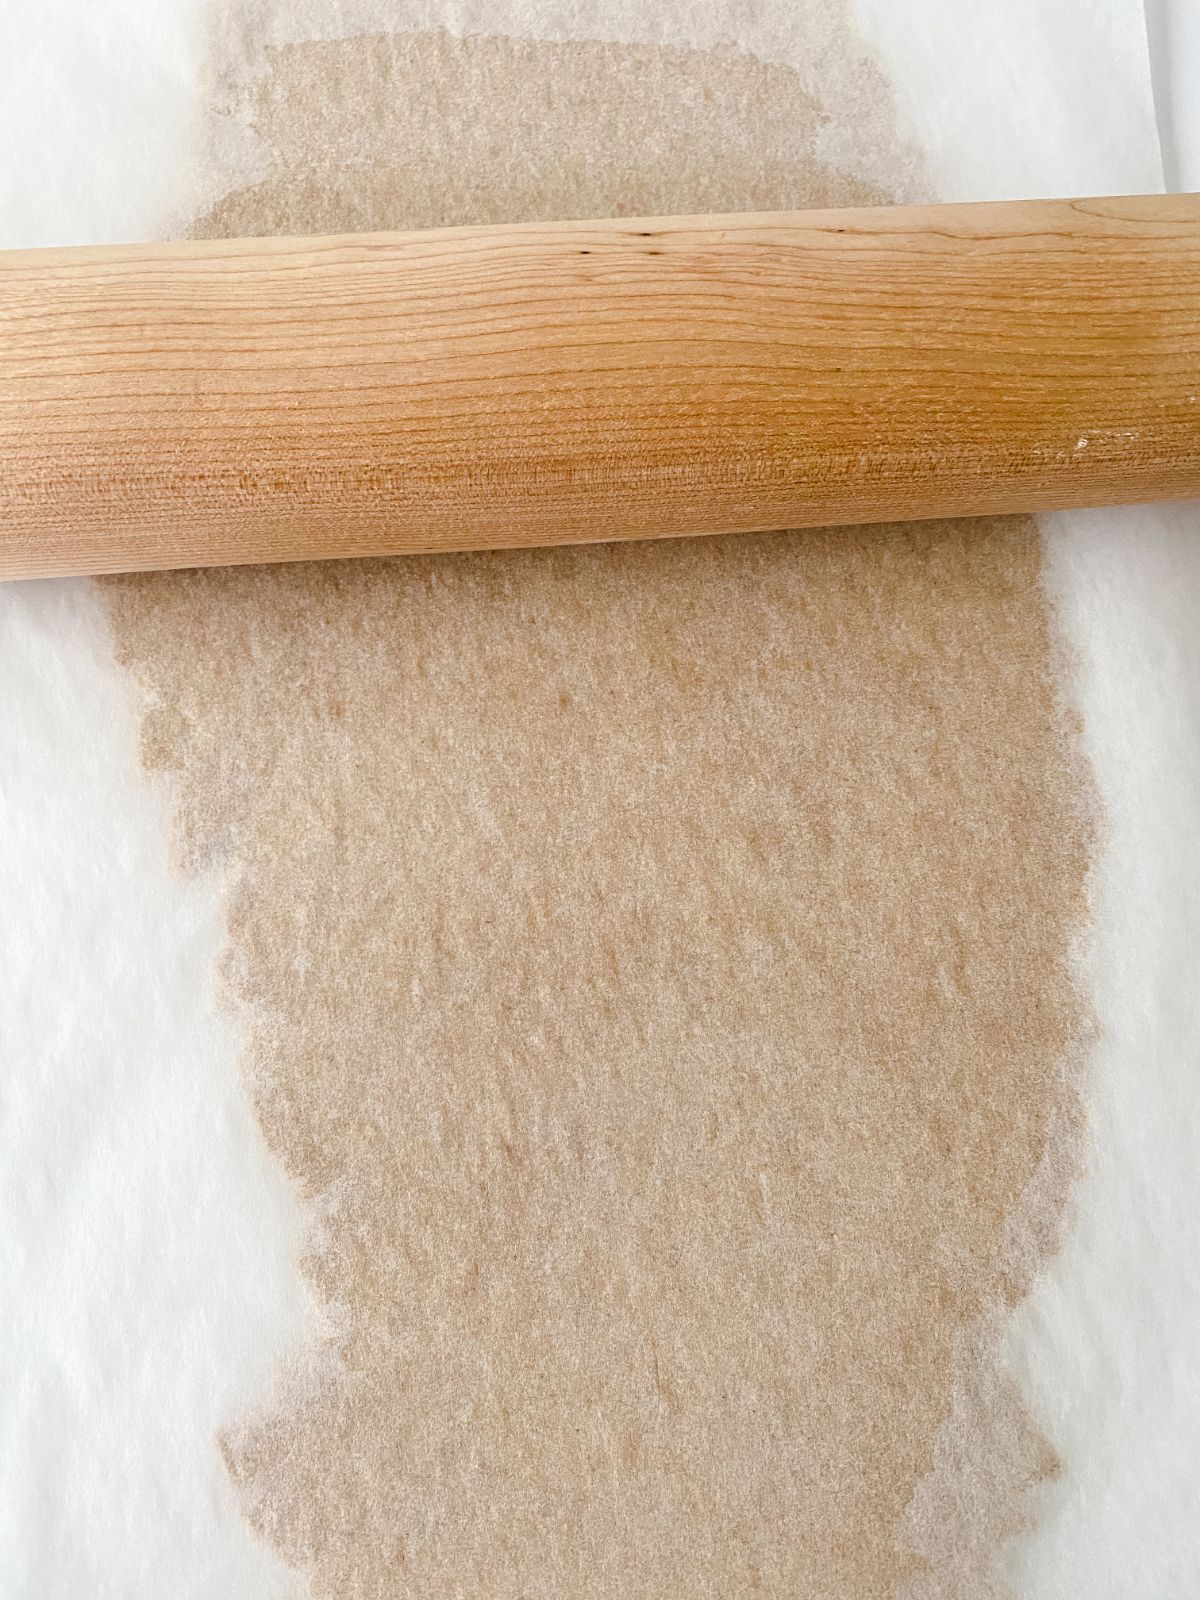 dough being rolled out between sheets of parchment paper